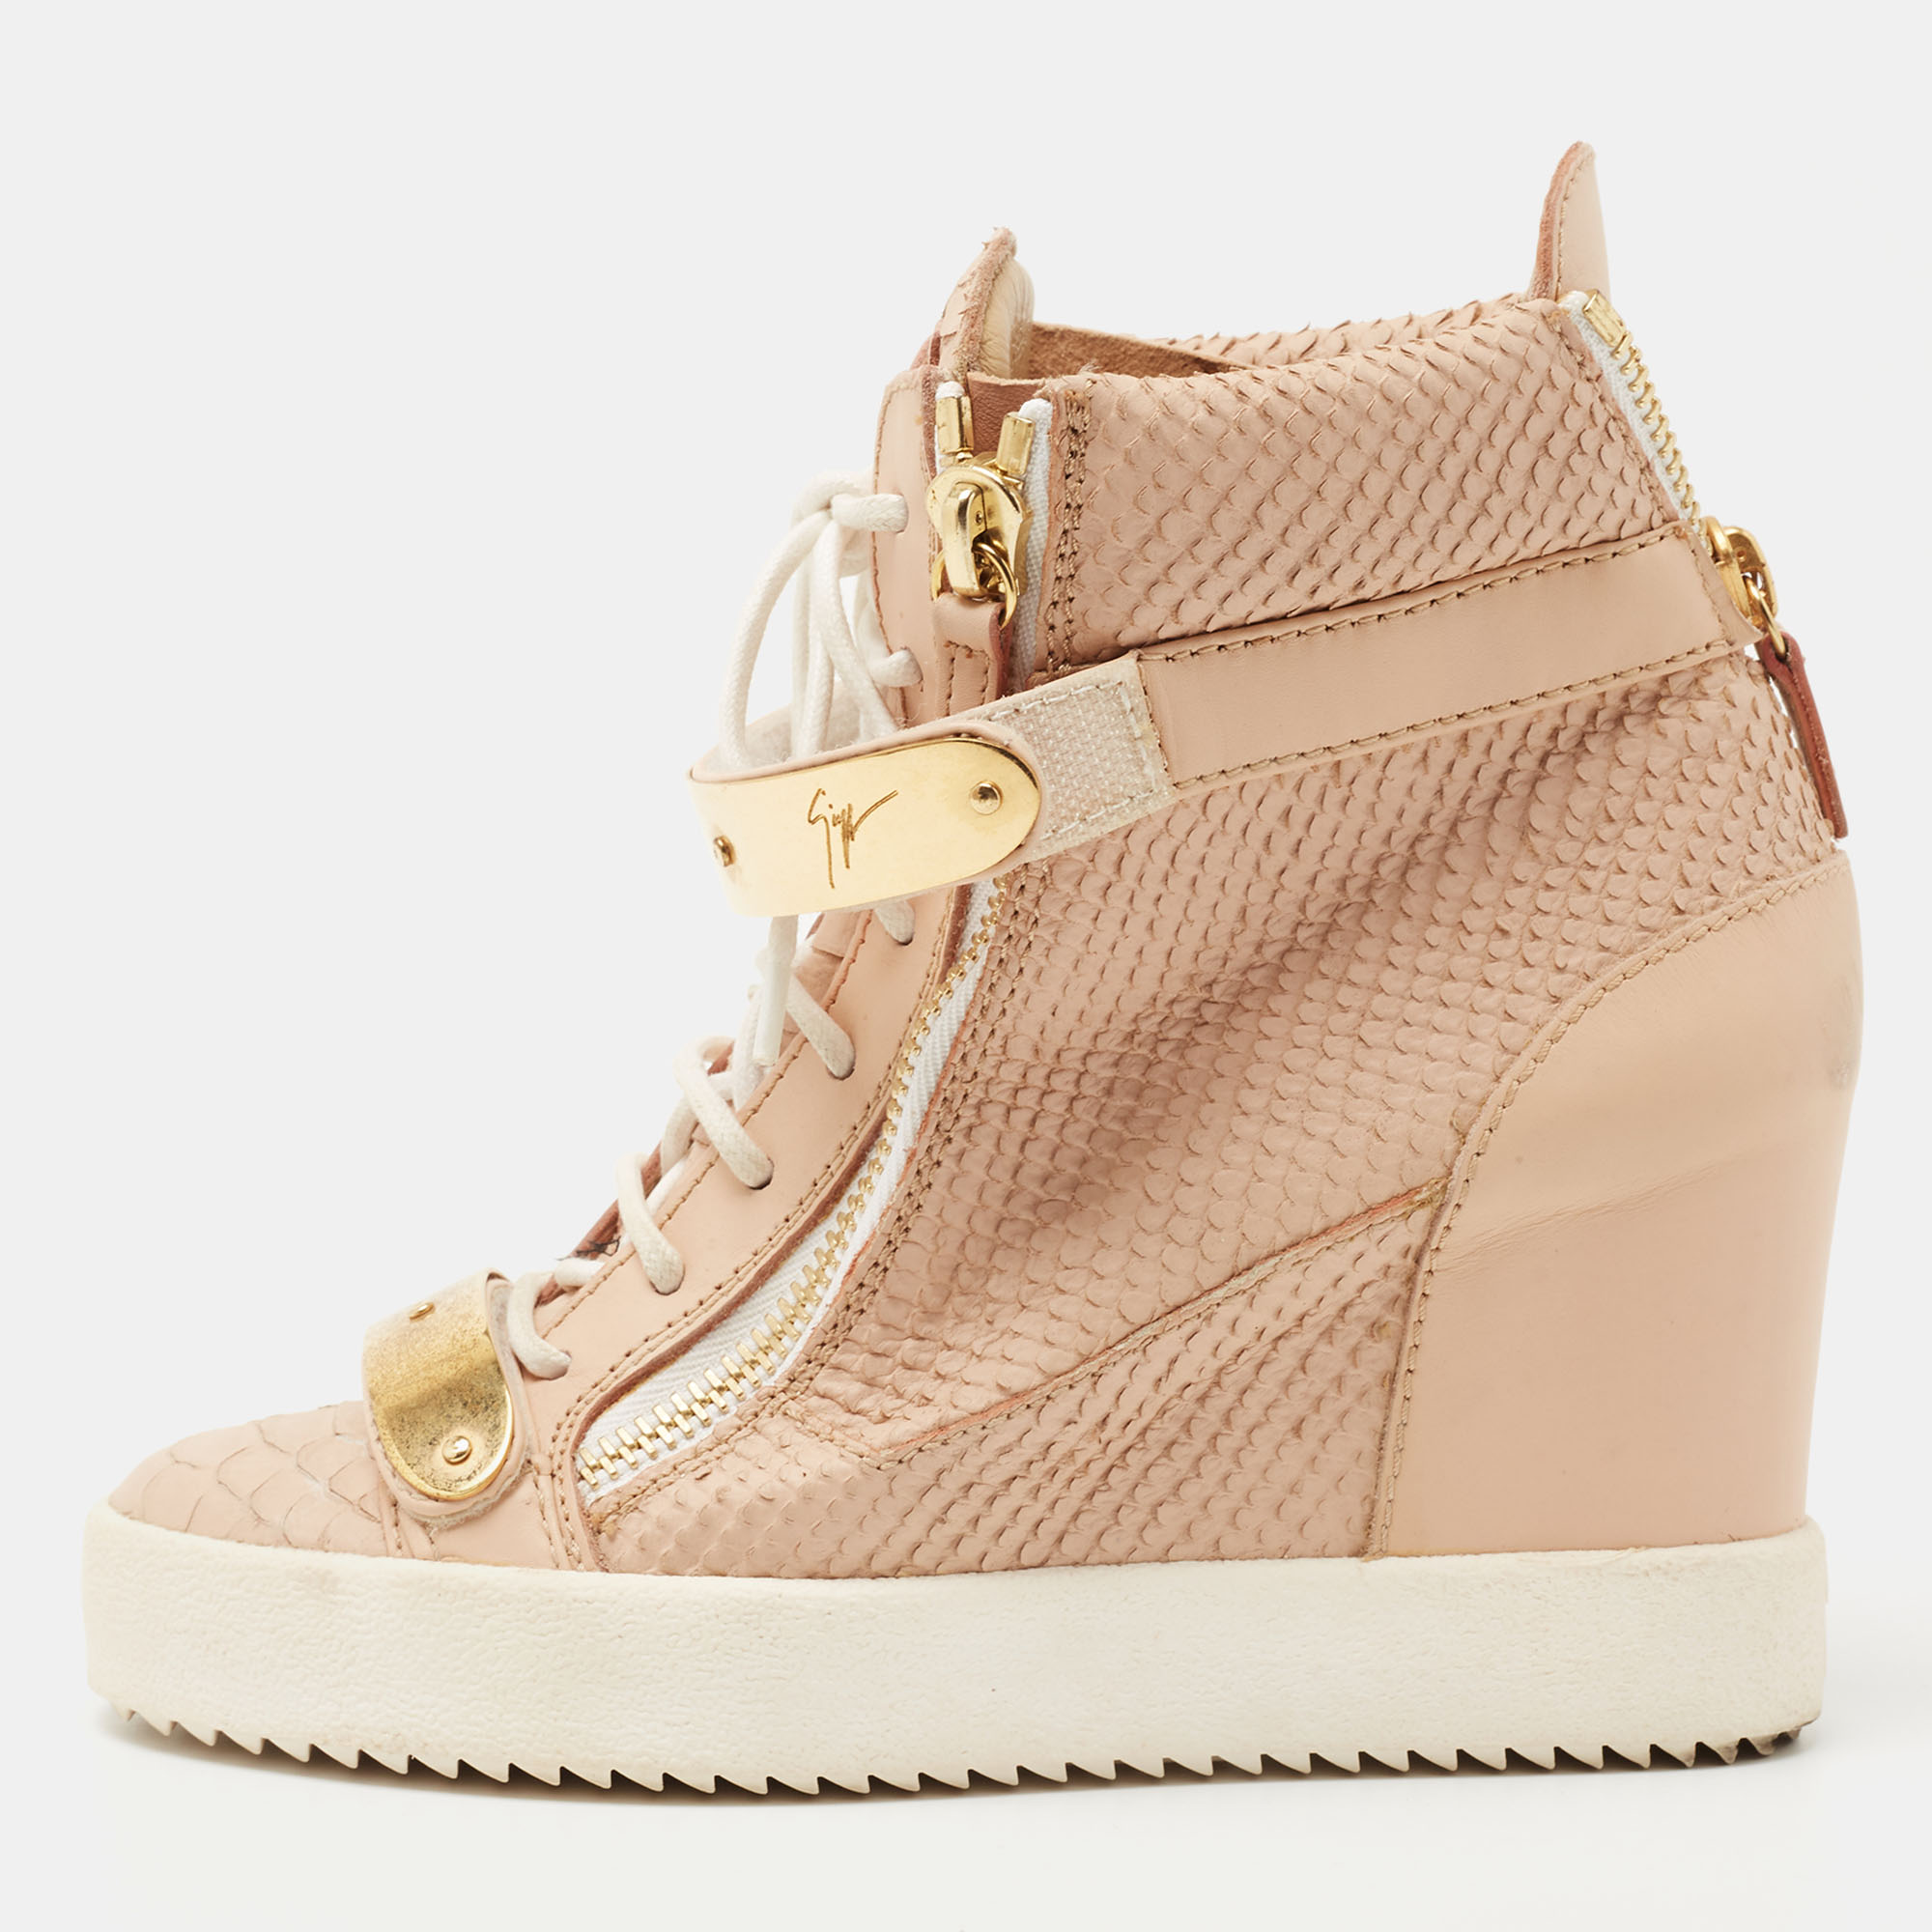 Pre-owned Giuseppe Zanotti Peach Pink Python Embossed Leather Coby Wedge Sneakers Size 38